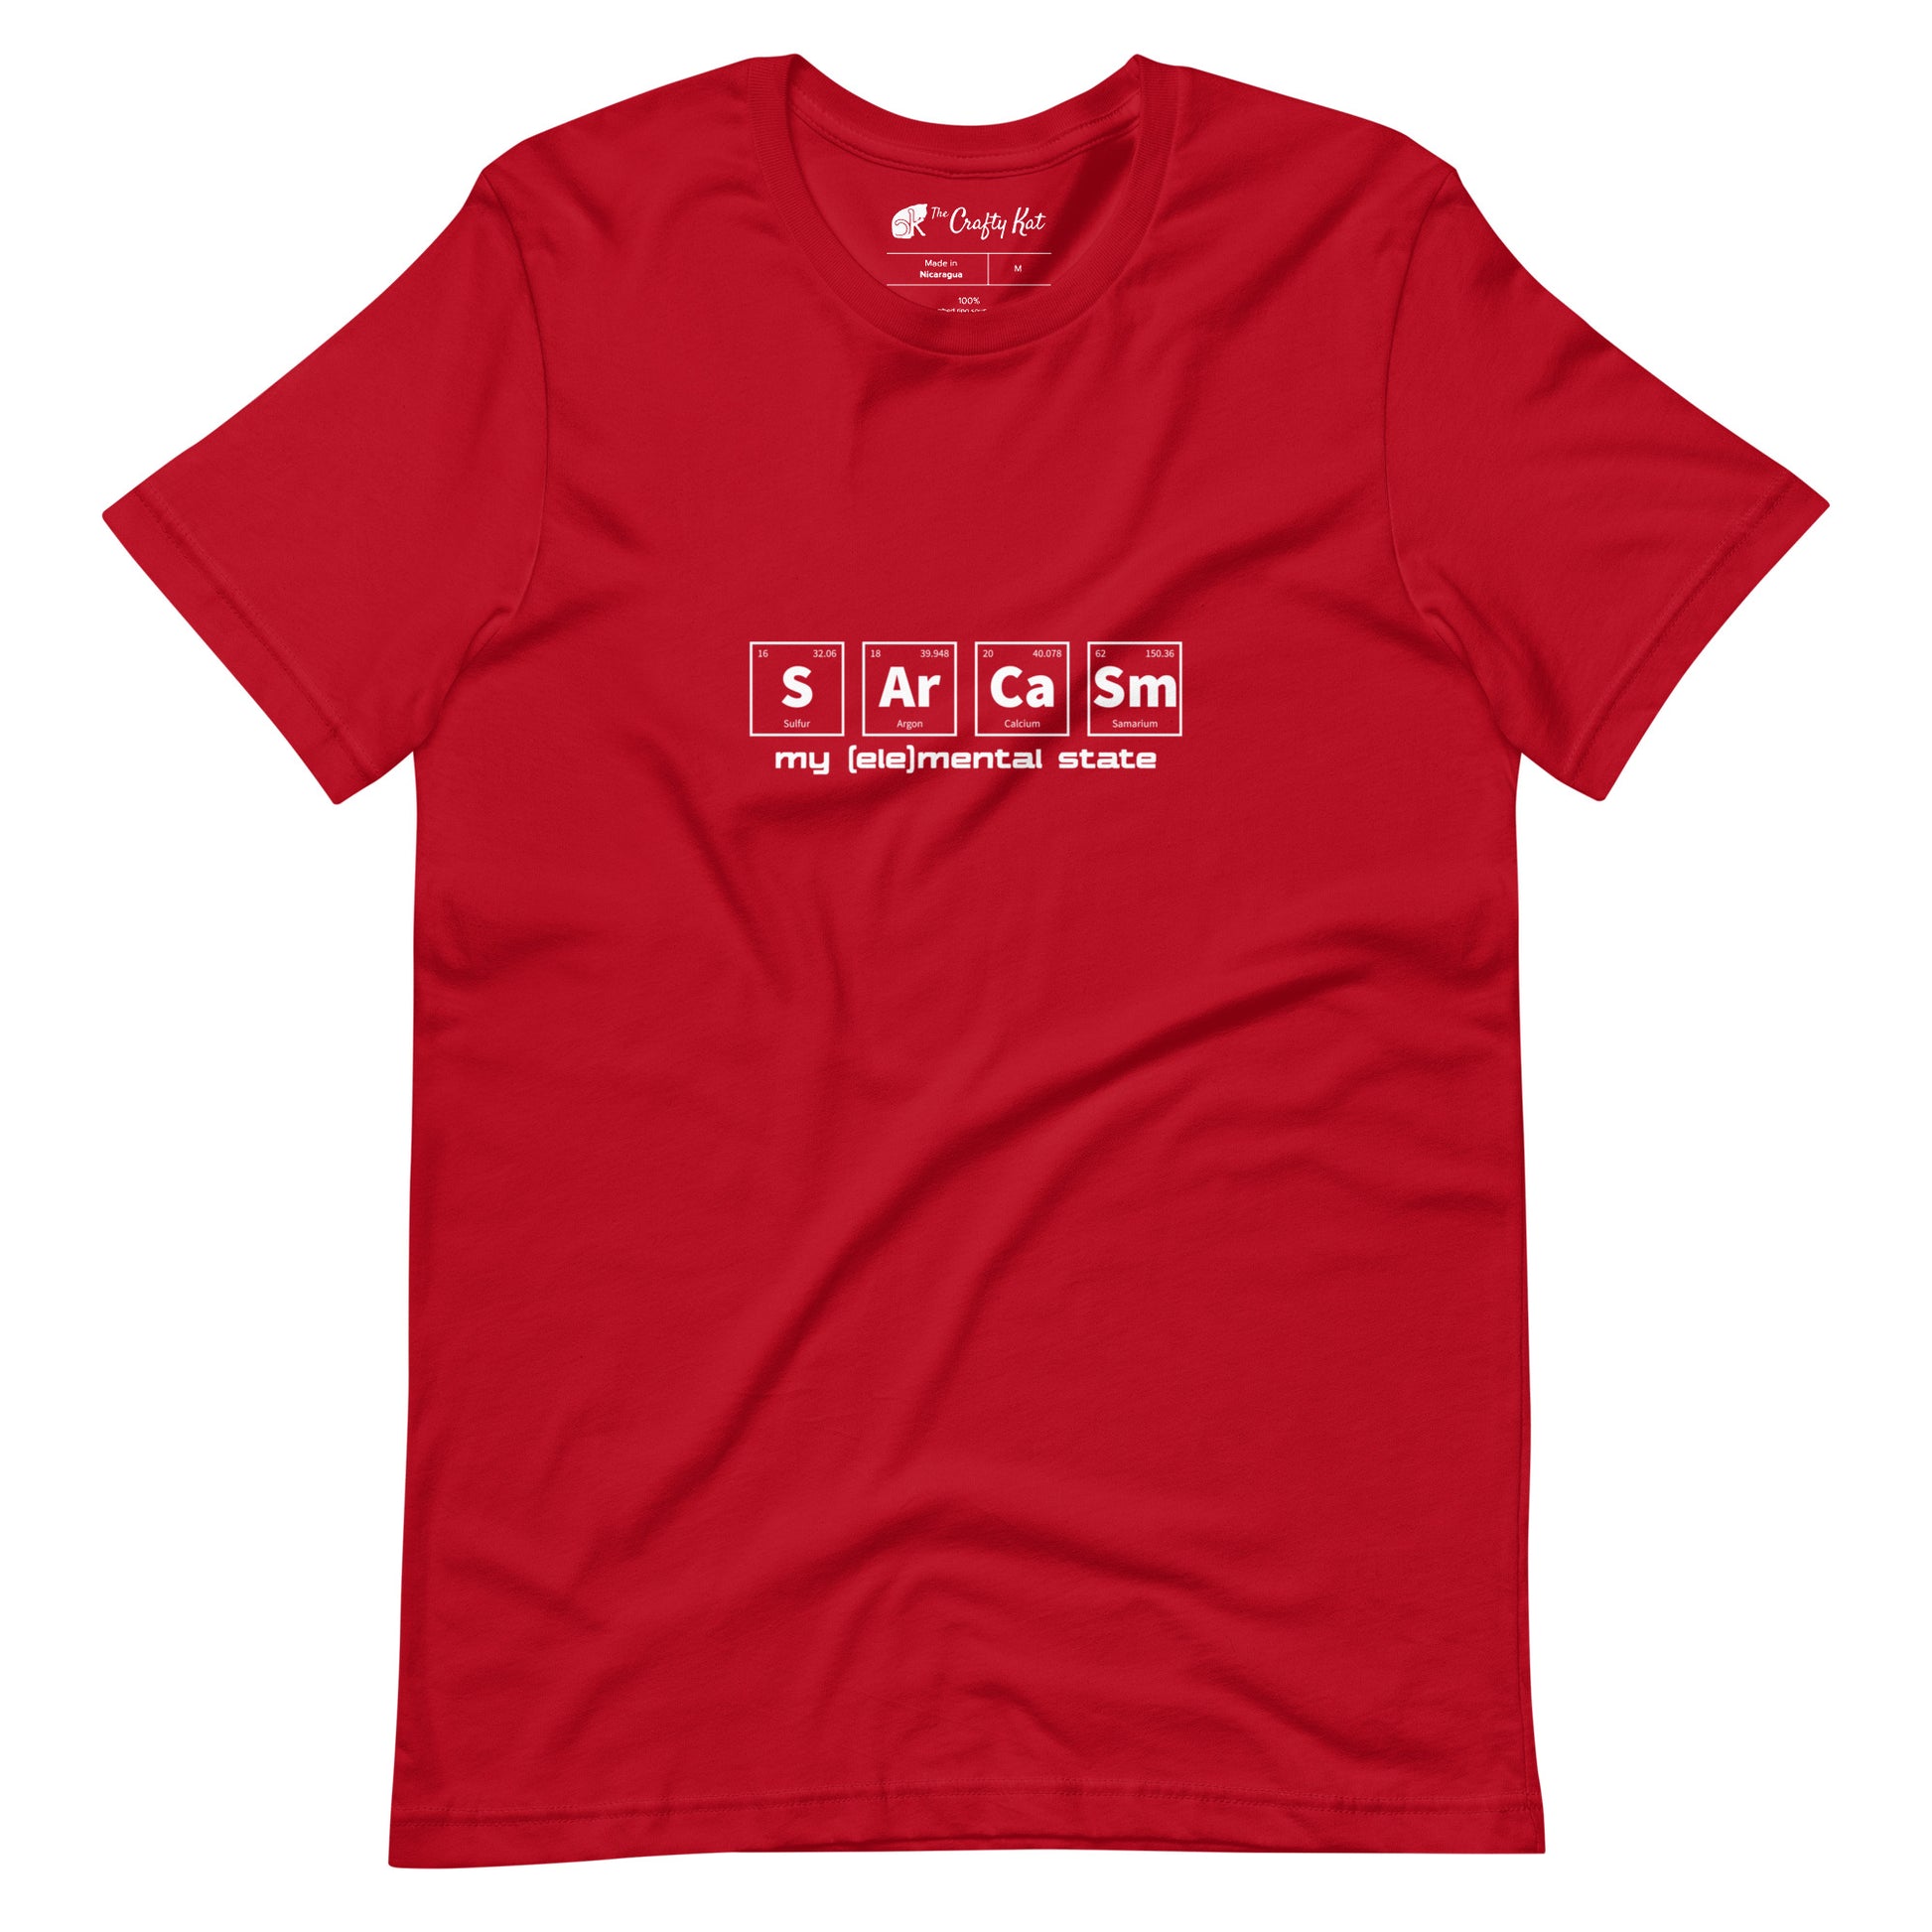 Red t-shirt with graphic of periodic table of elements symbols for Sulfur (S), Argon (Ar), Calcium (Ca), and Samarium (Sm) and text "my (ele)mental state"